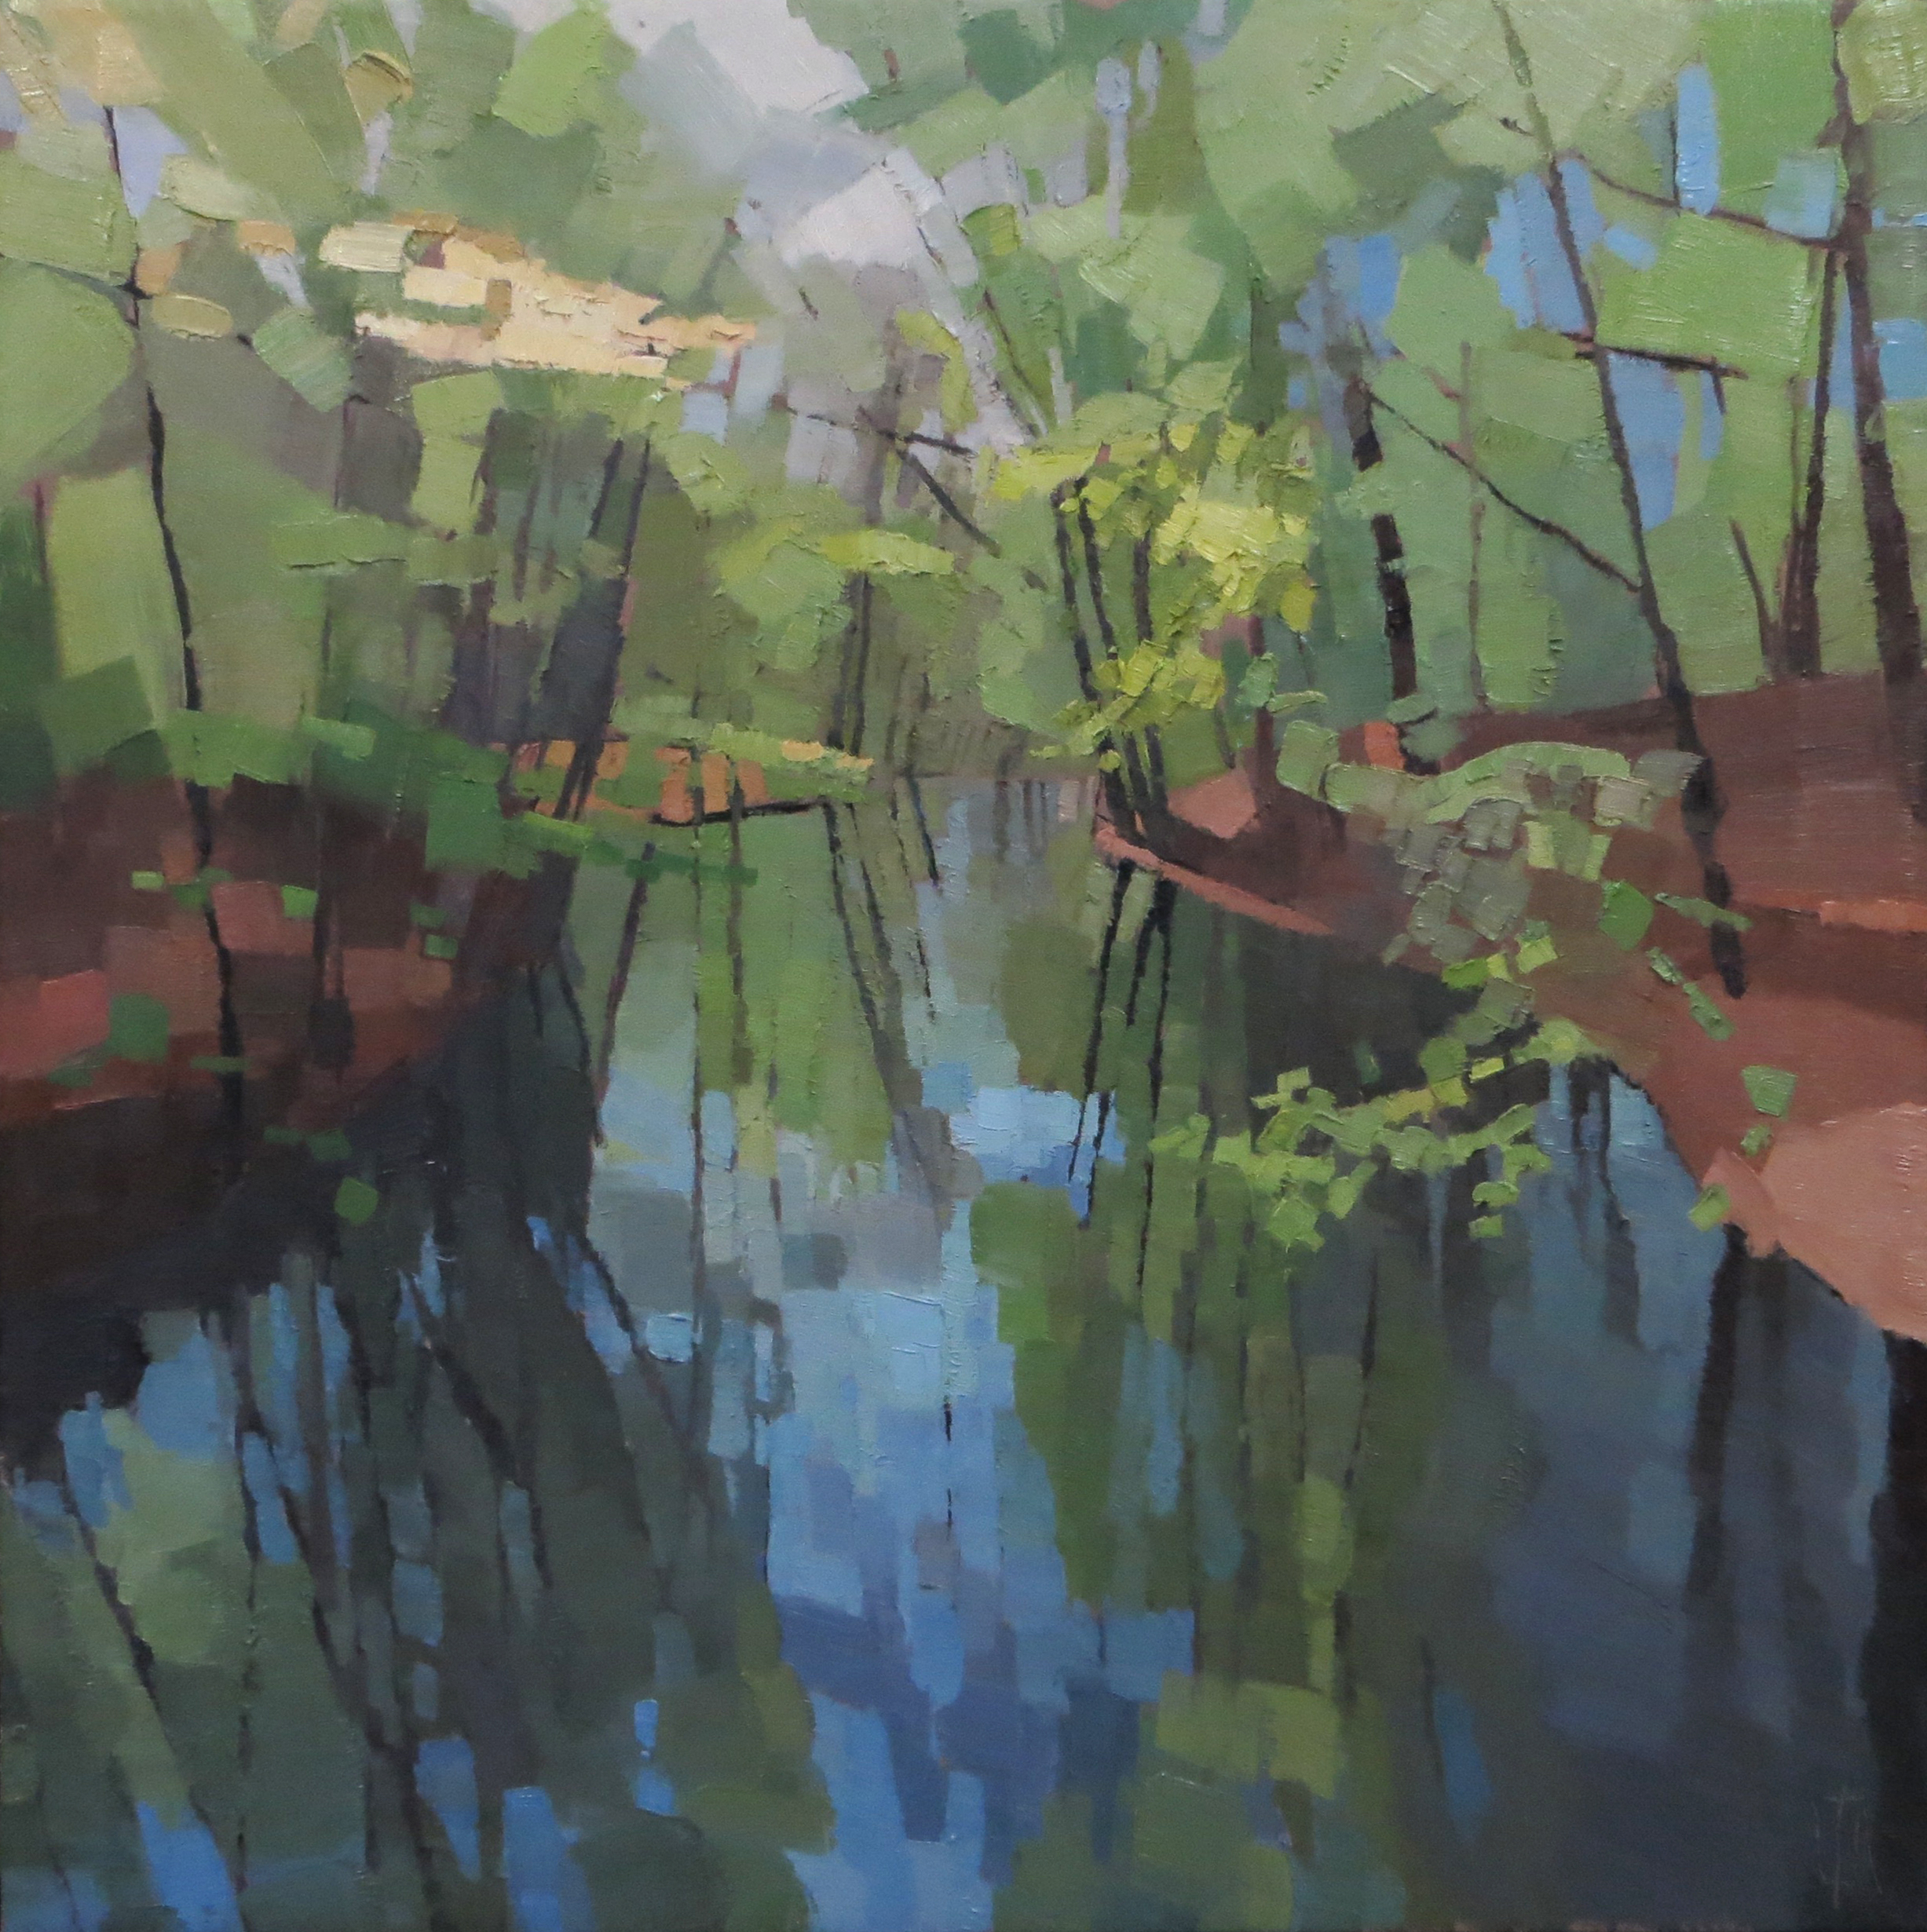   Emerald Cut River  24 x 24 oil on linen  sold 